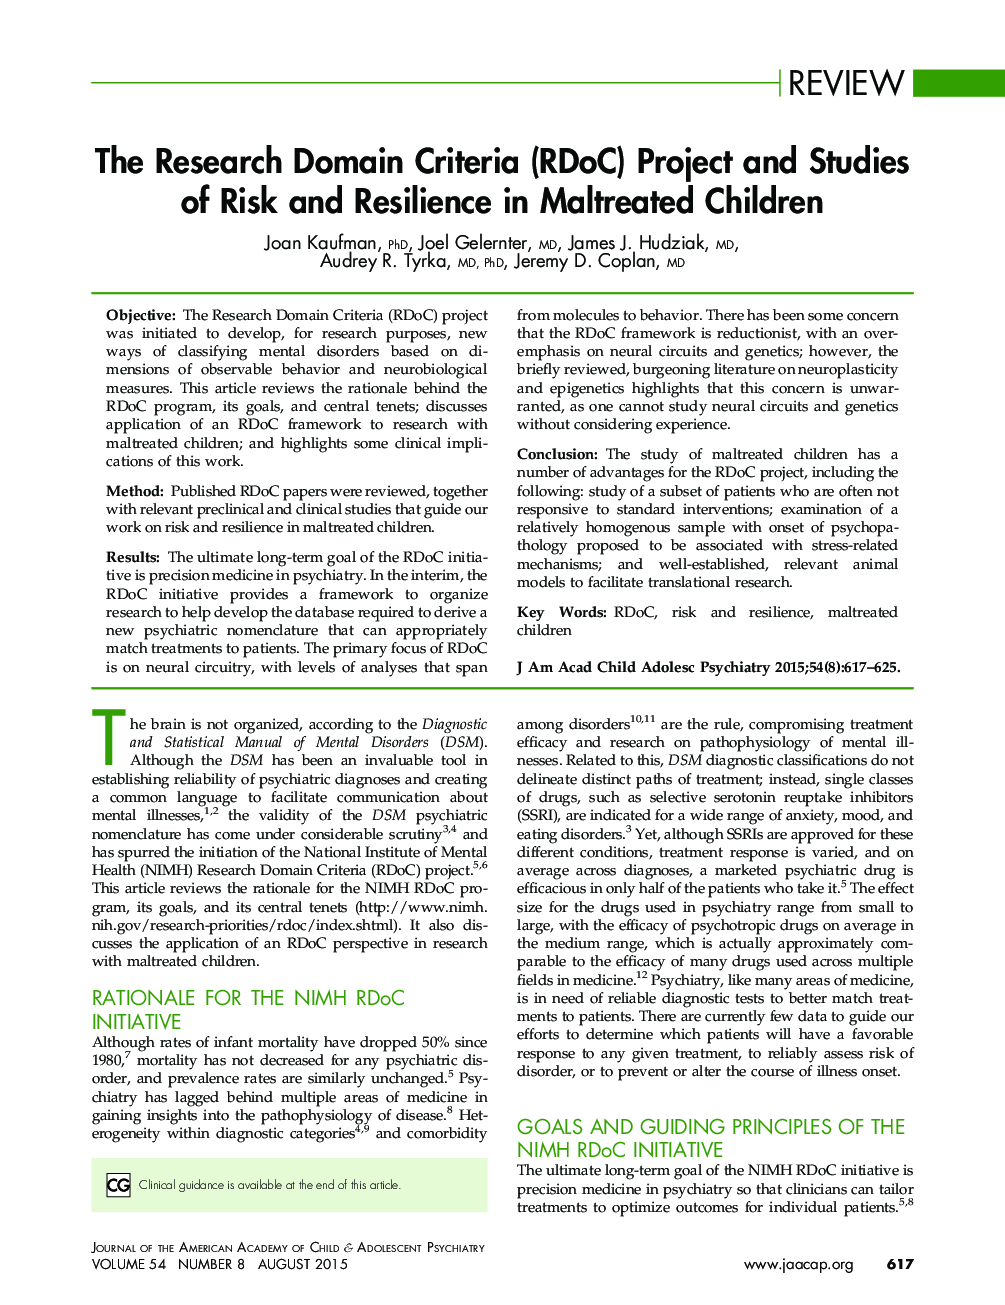 The Research Domain Criteria (RDoC) Project and Studies of Risk and Resilience in Maltreated Children 